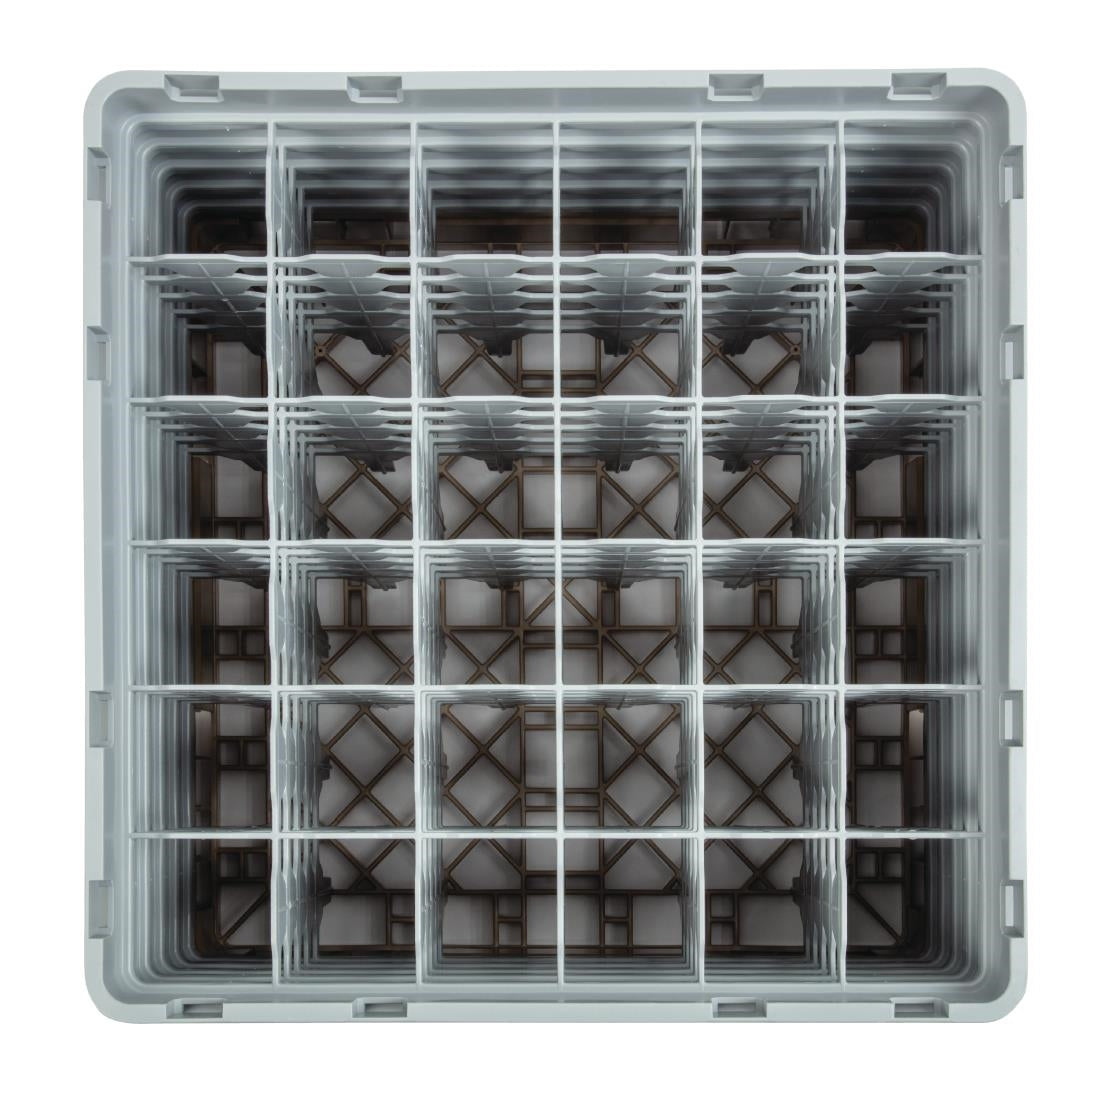 Cambro Camrack Beige 36 Compartments Max Glass Height 257mm JD Catering Equipment Solutions Ltd